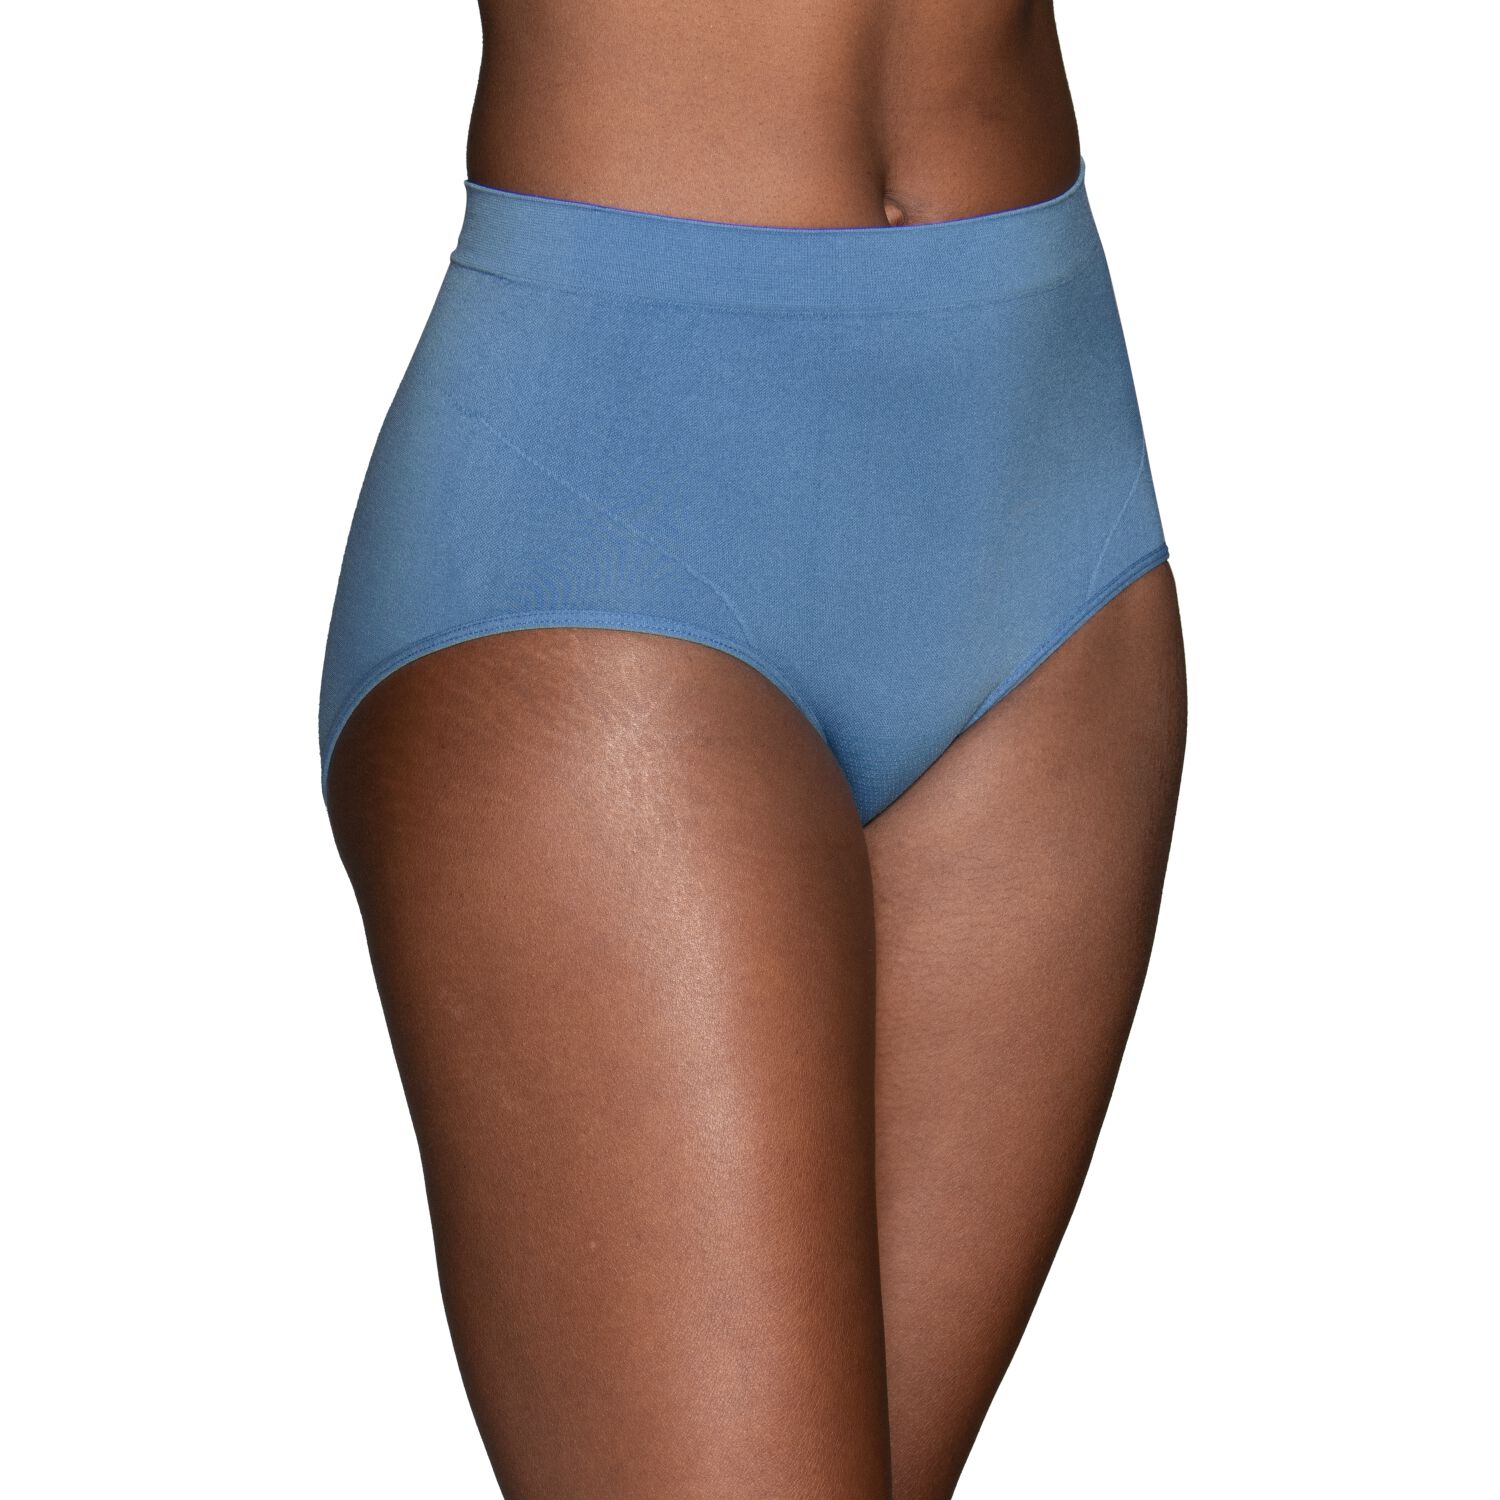 Large size seamless non-trace model body underwear of